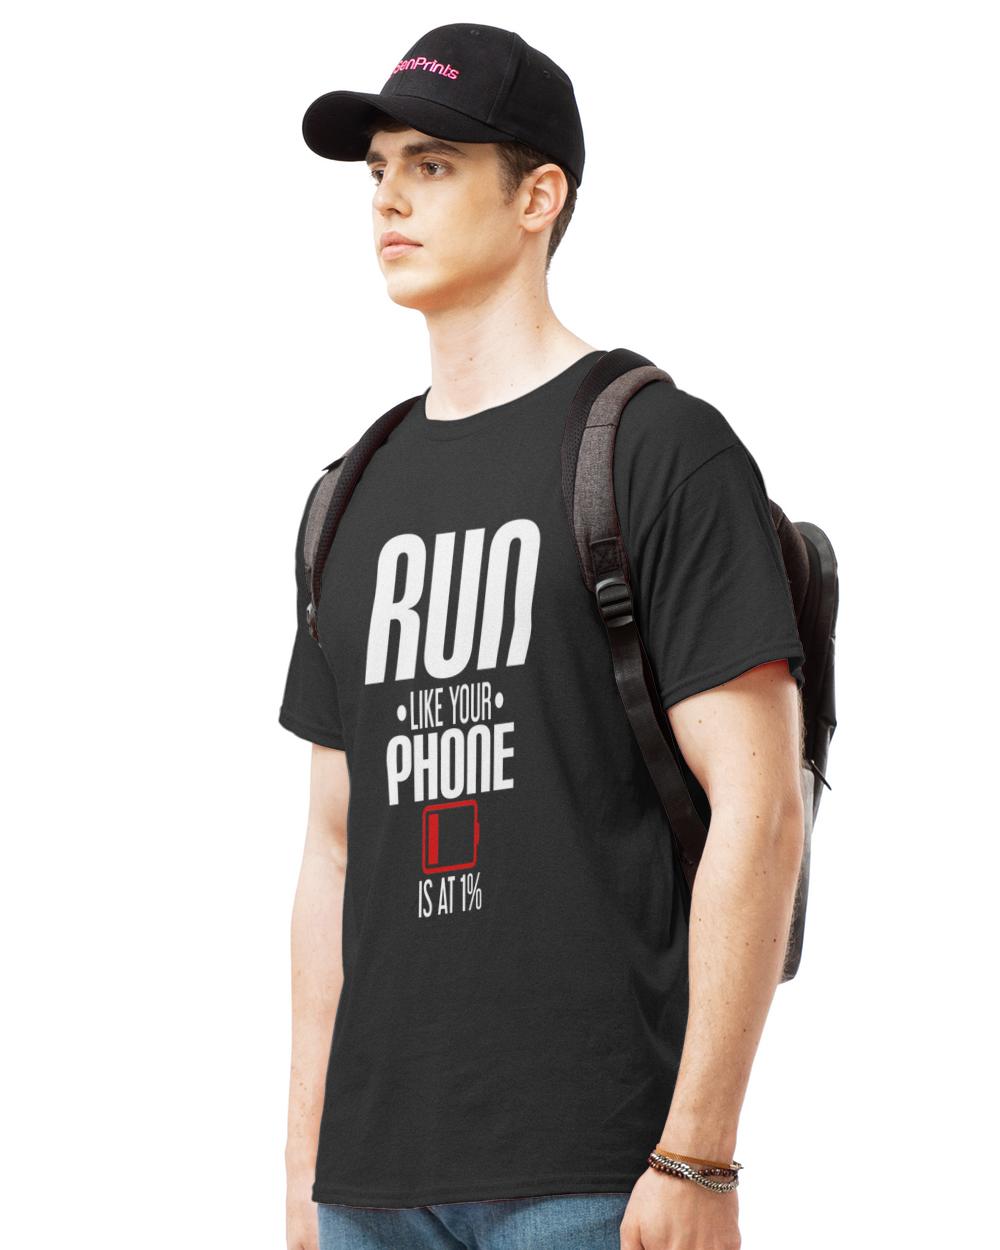 Nice run like your phone is at 1  funny low battery runner5852 t-shirt